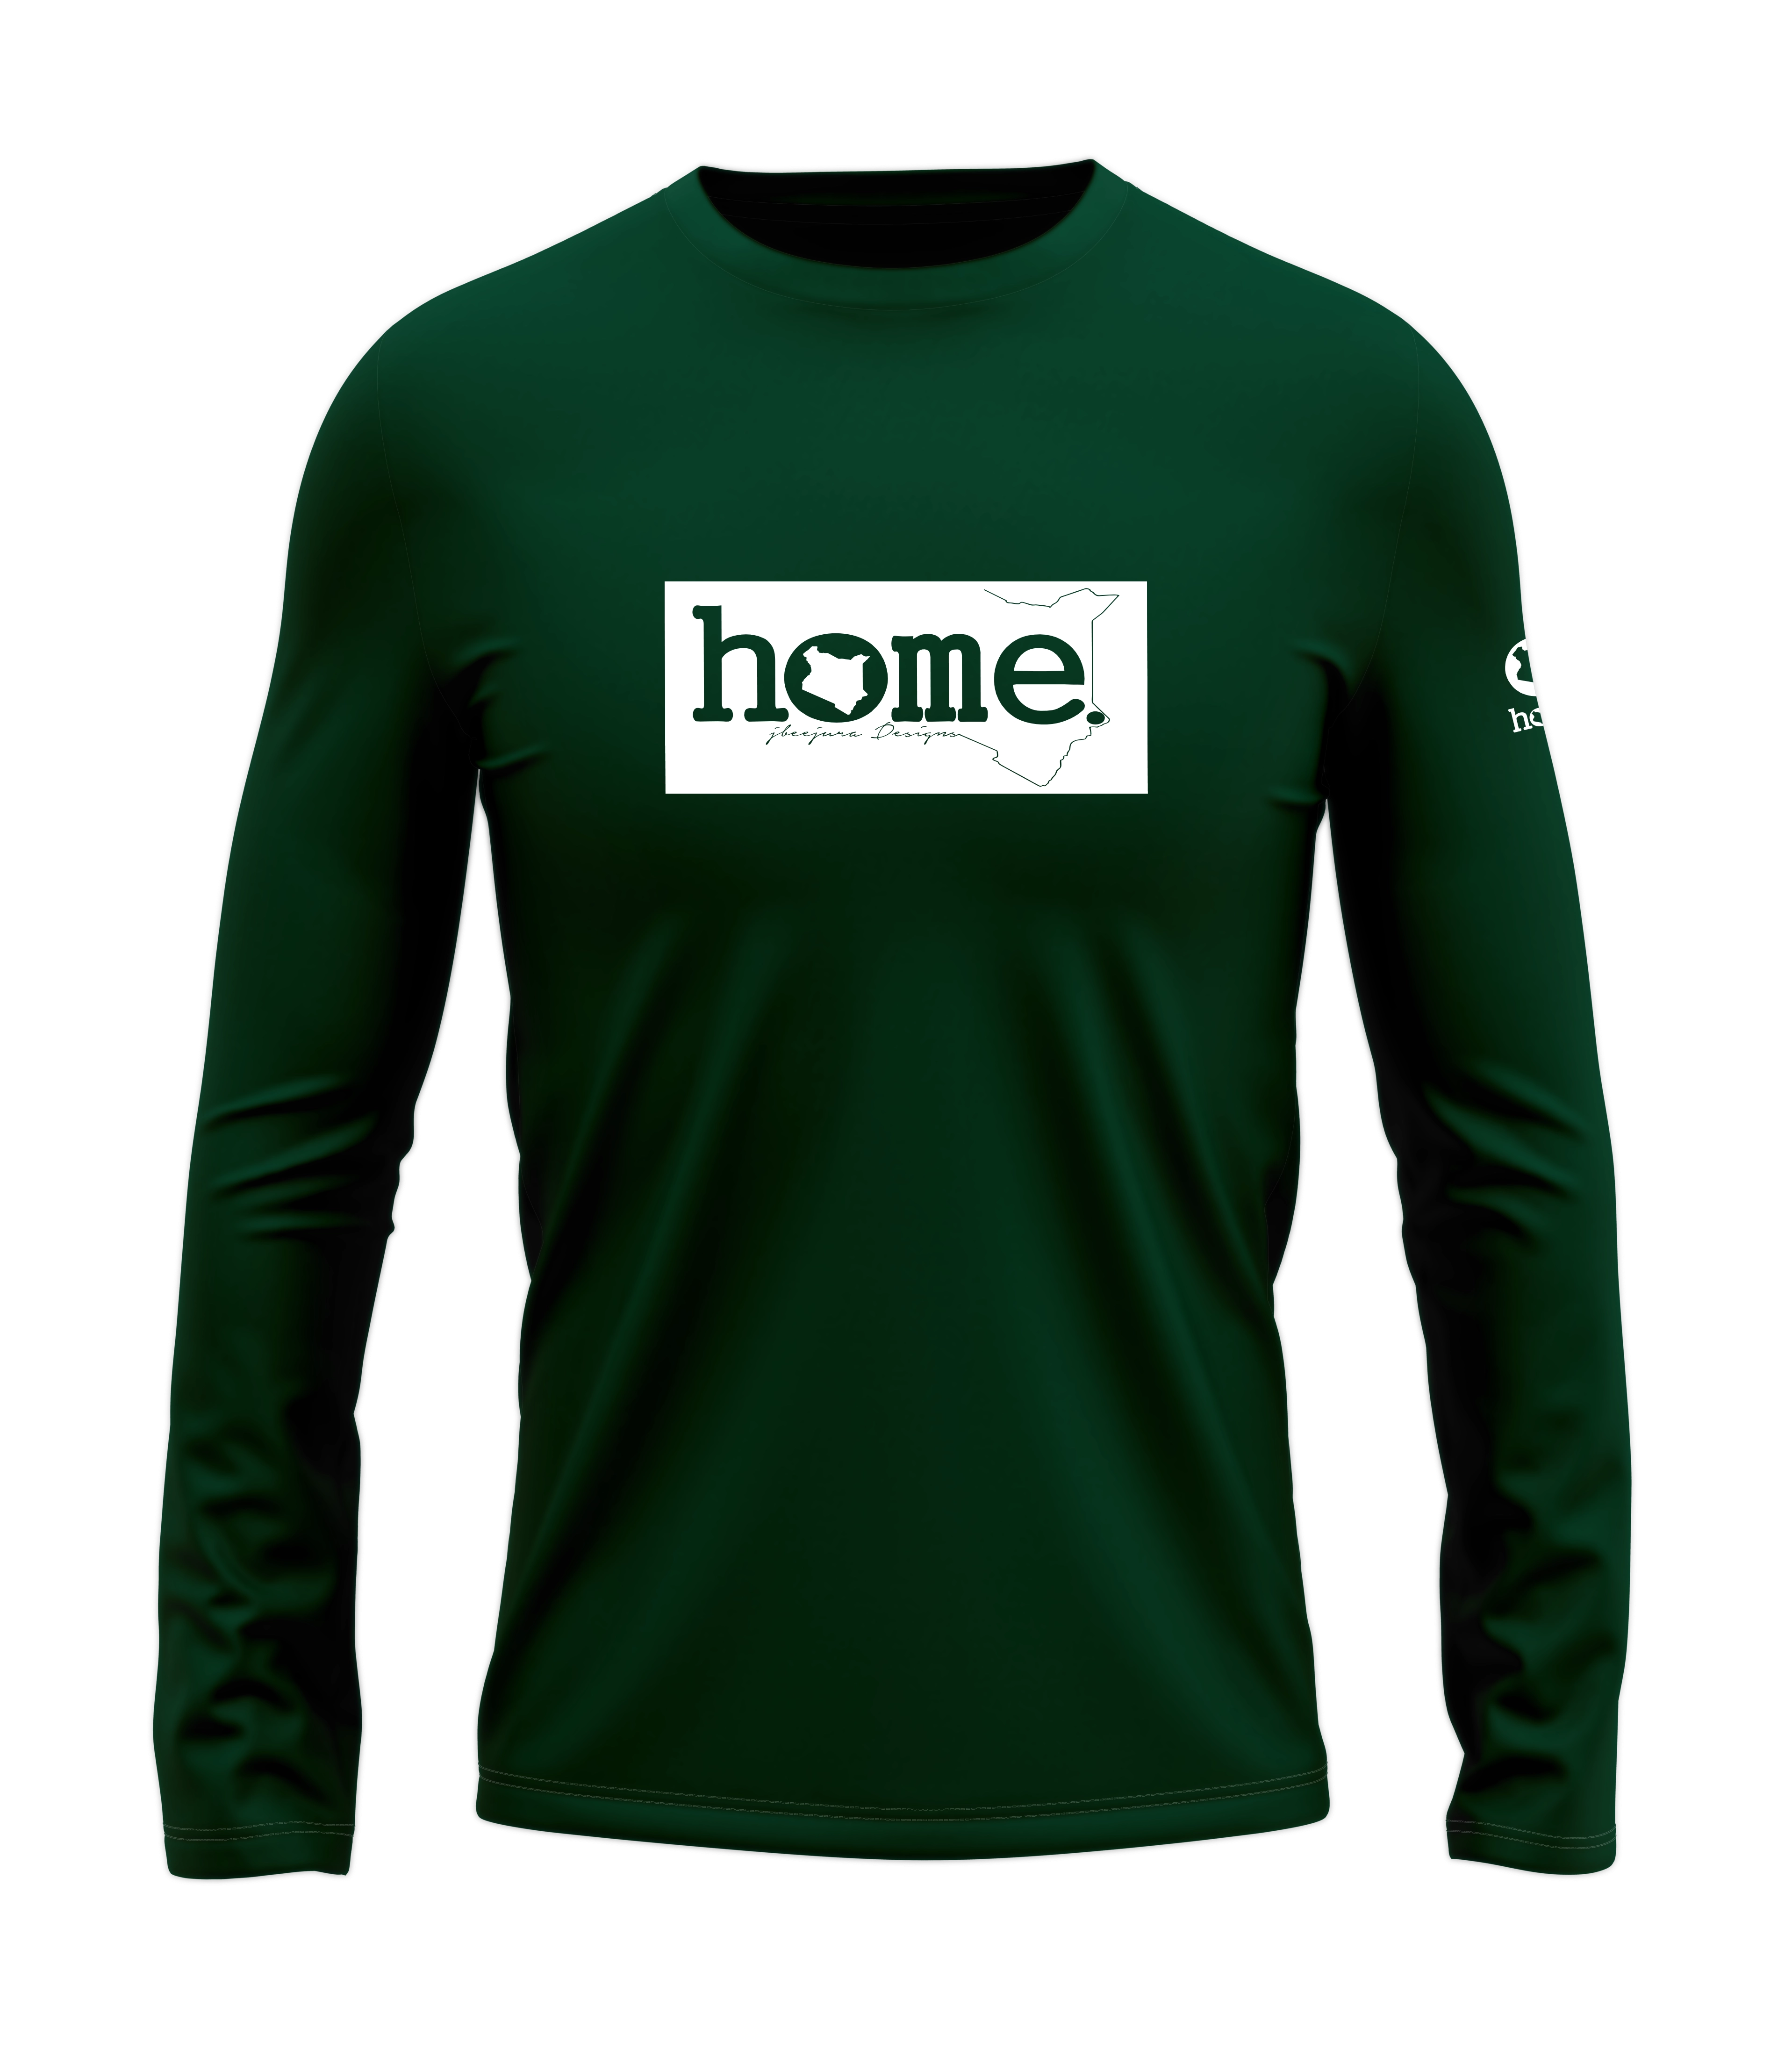 home_254 LONG-SLEEVED RICH GREEN T-SHIRT WITH A WHITE CLASSIC PRINT – COTTON PLUS FABRIC